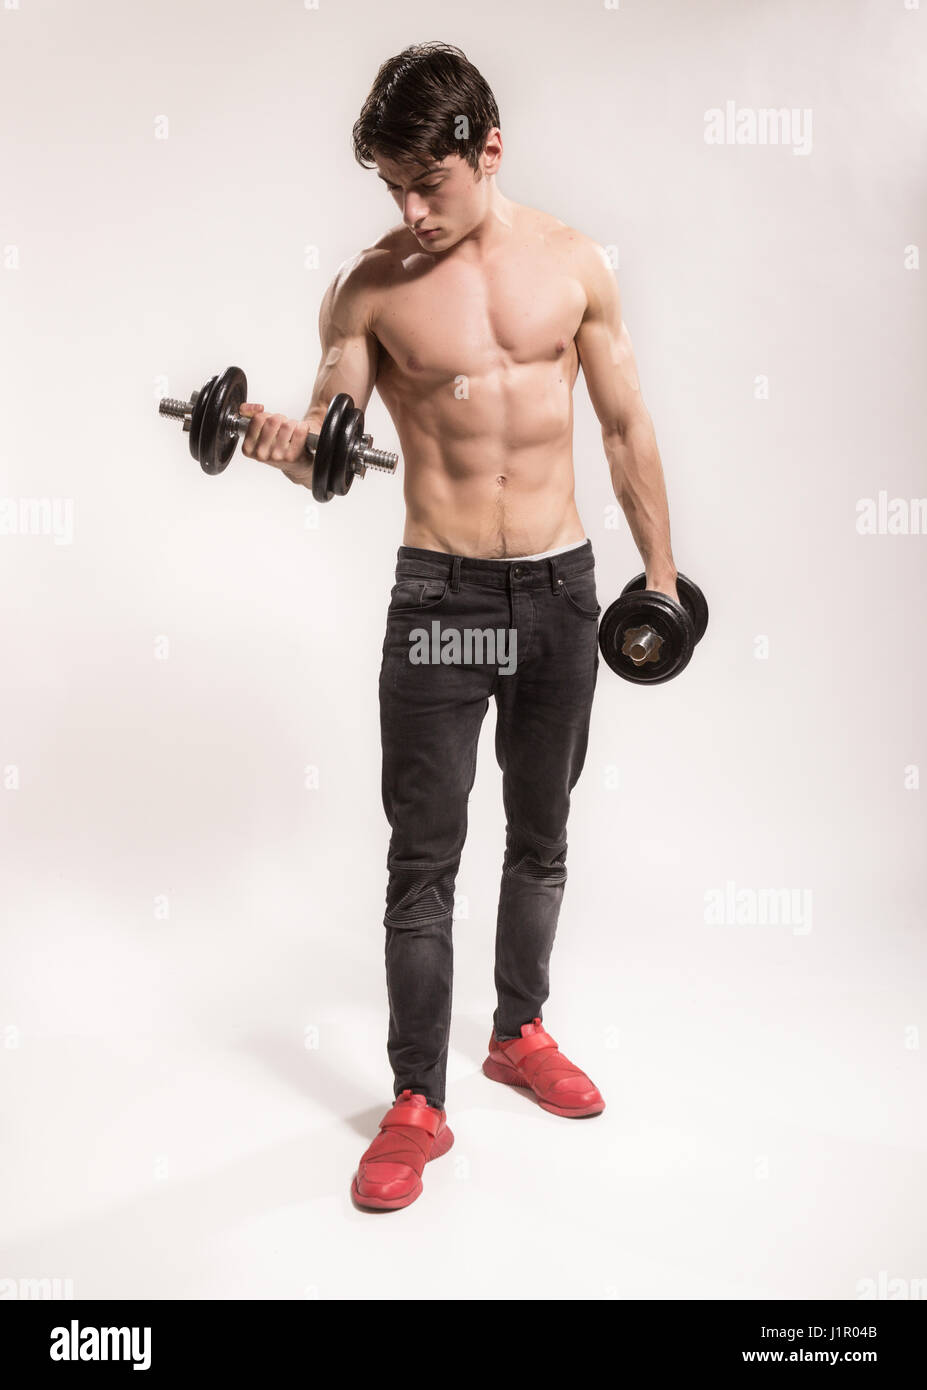 Young Adult Man Strong Muscular Bodybuilder Posing Dumbbells Images, Photos, Reviews